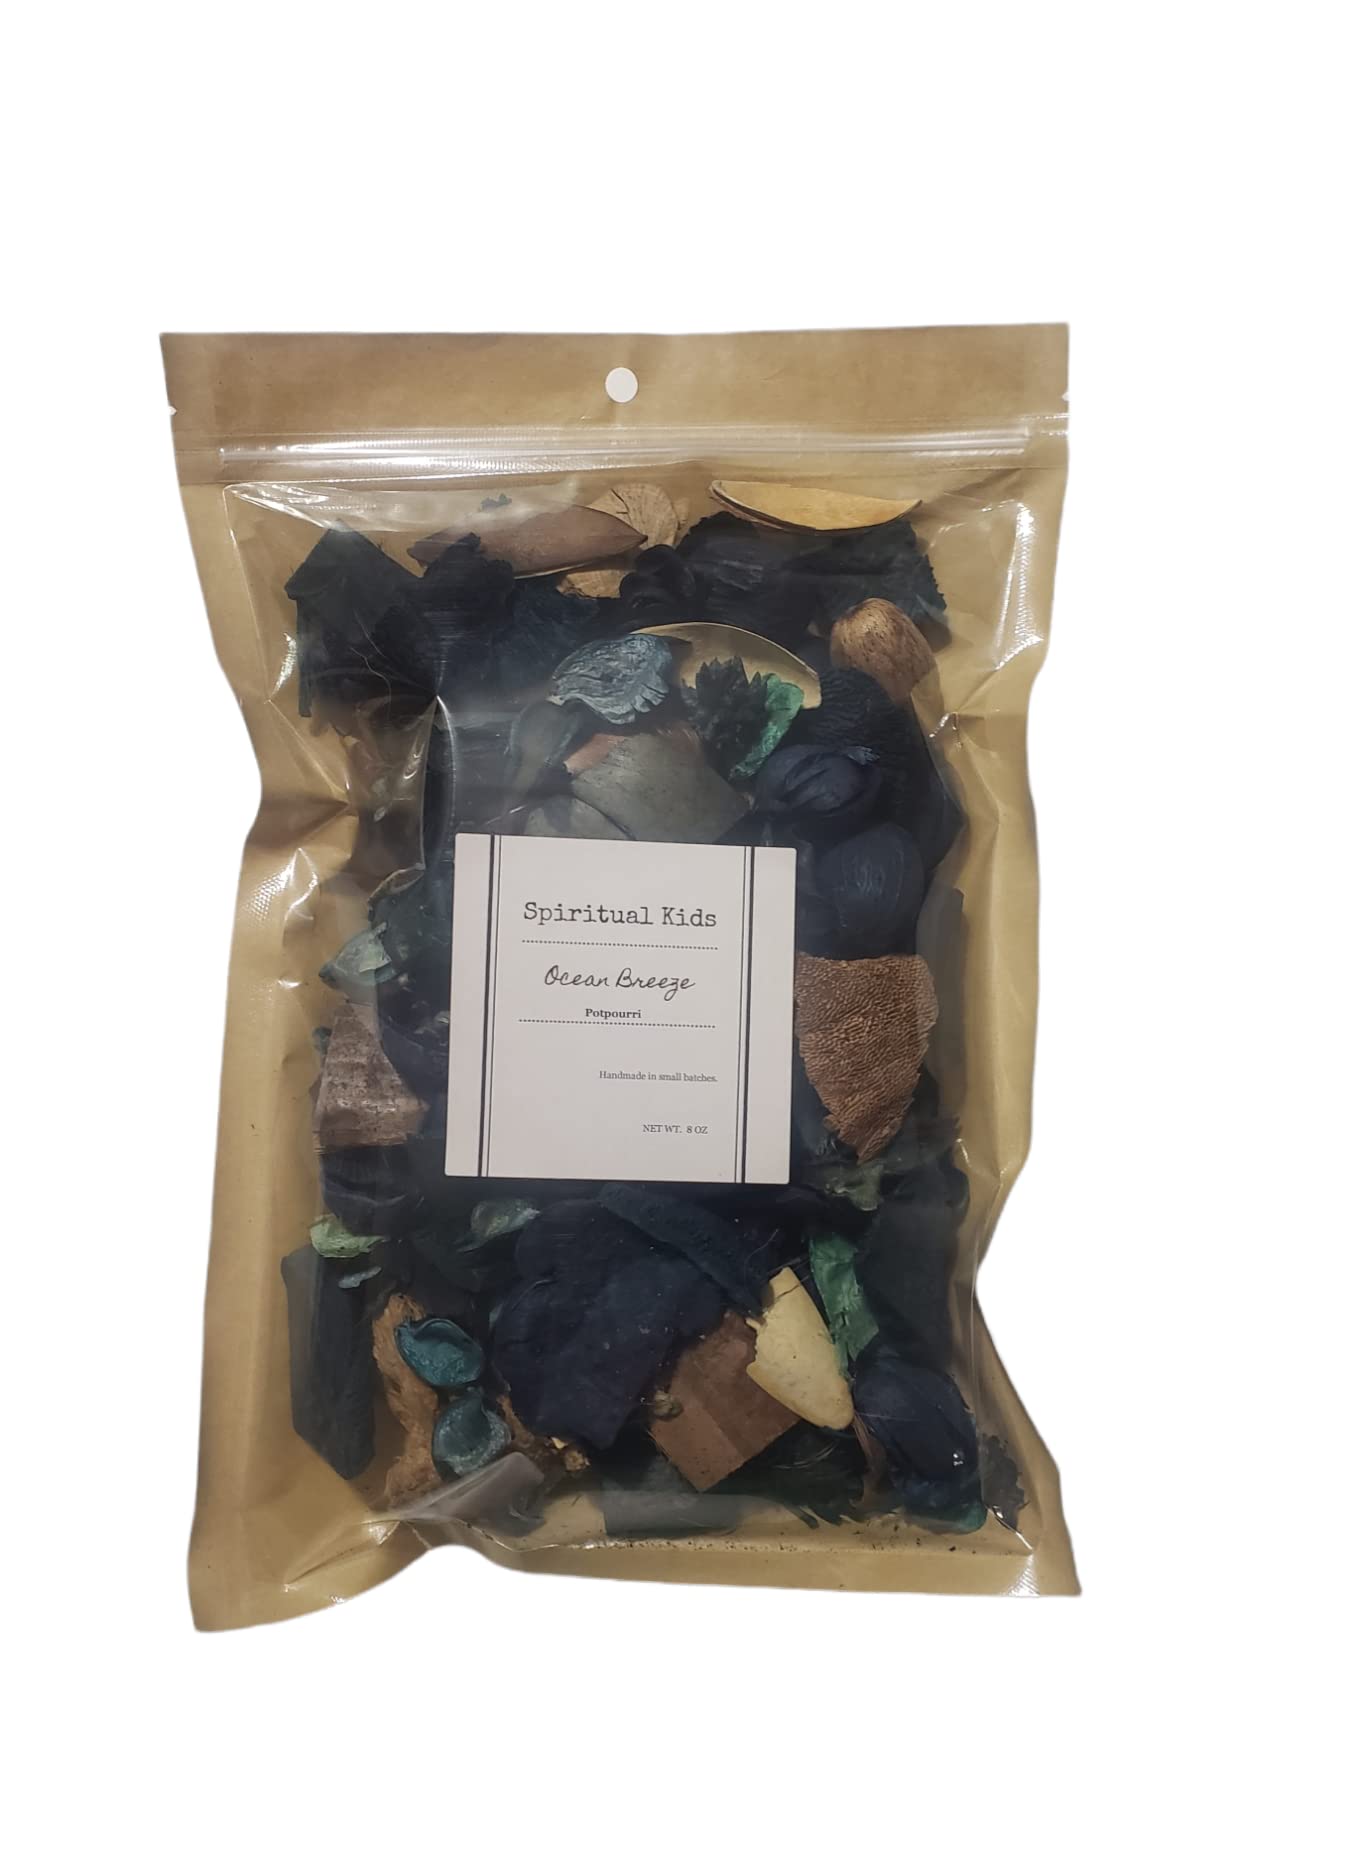 Ocean Breeze Potpourri made with Fragrant/Essential Oils 8oz Hand Made FREE SHIPPING SCENTED Nature Gift House Warming Gift!